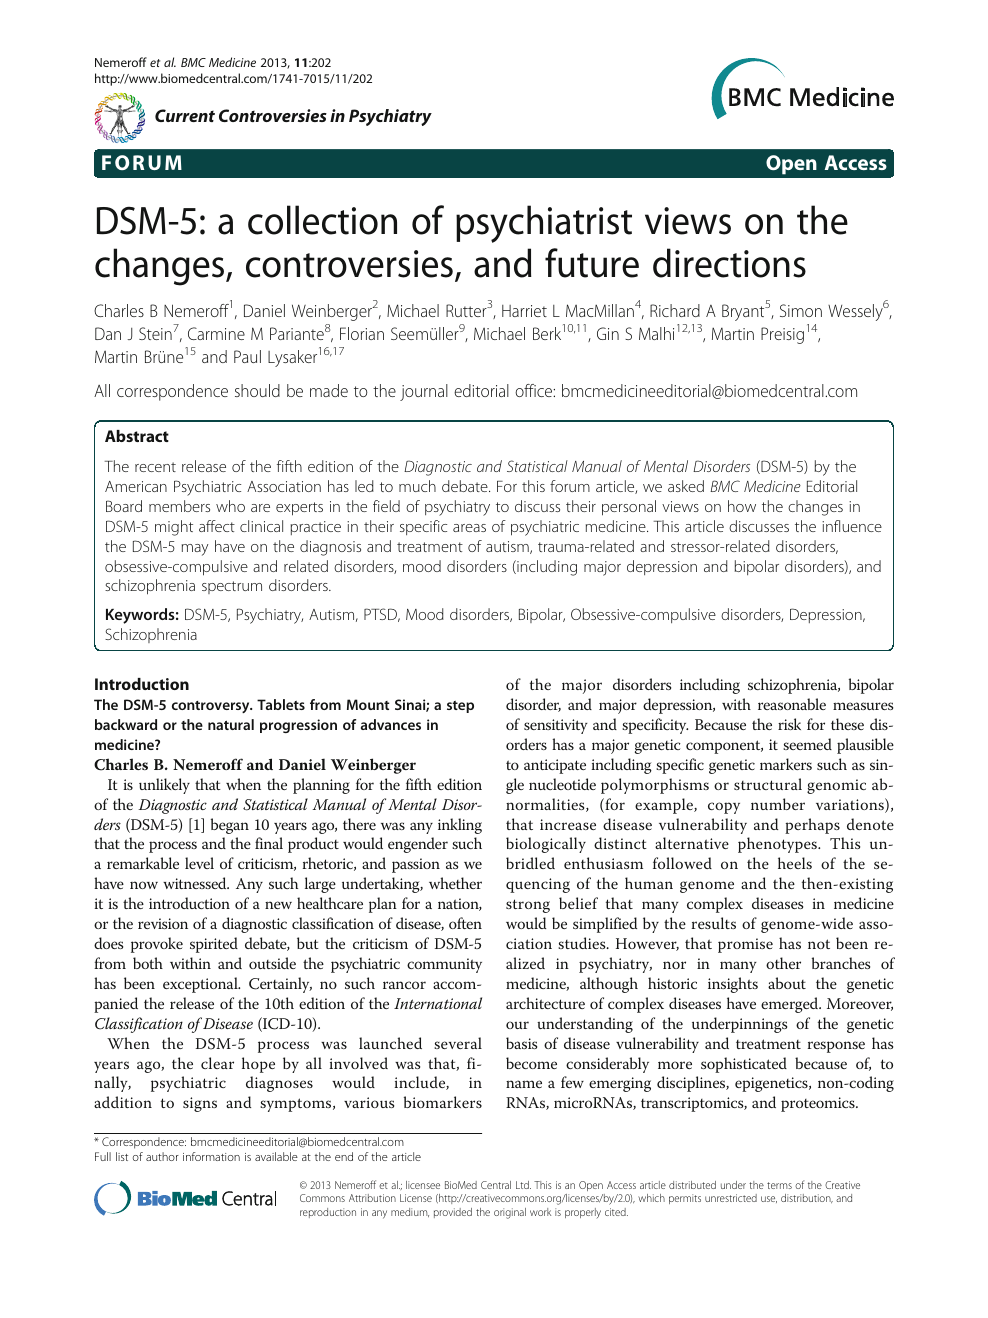 DSM-5: a collection of psychiatrist views on the changes, controversies,  and future directions – topic of research paper in Clinical medicine.  Download scholarly article PDF and read for free on CyberLeninka open